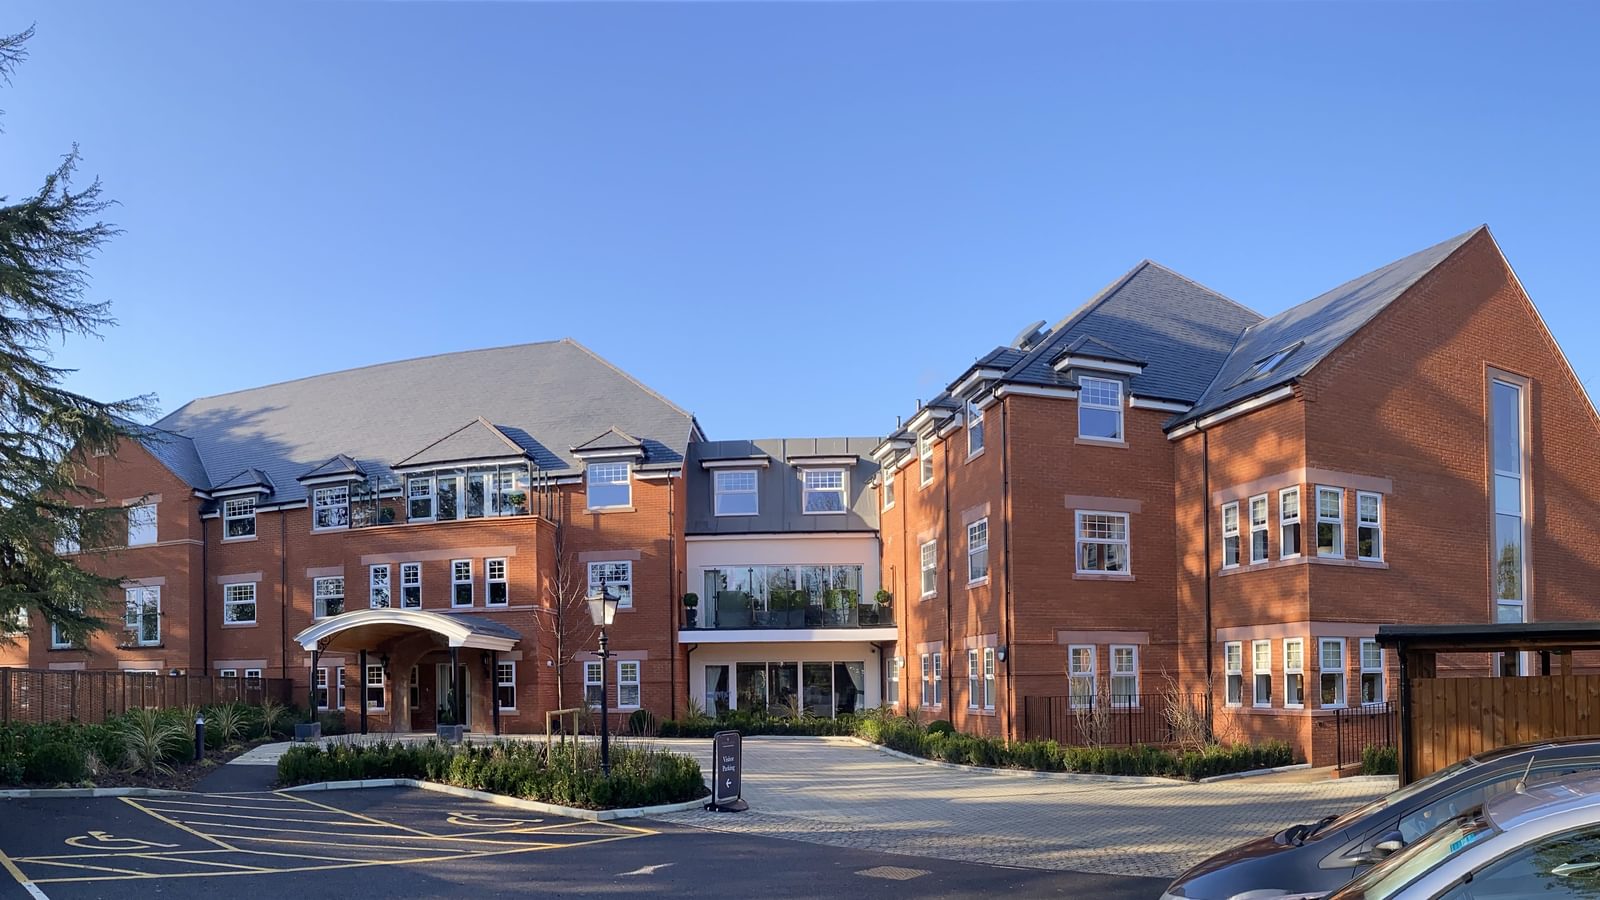 Exterior of Horsell Lodge Care Home in Woking, Surrey